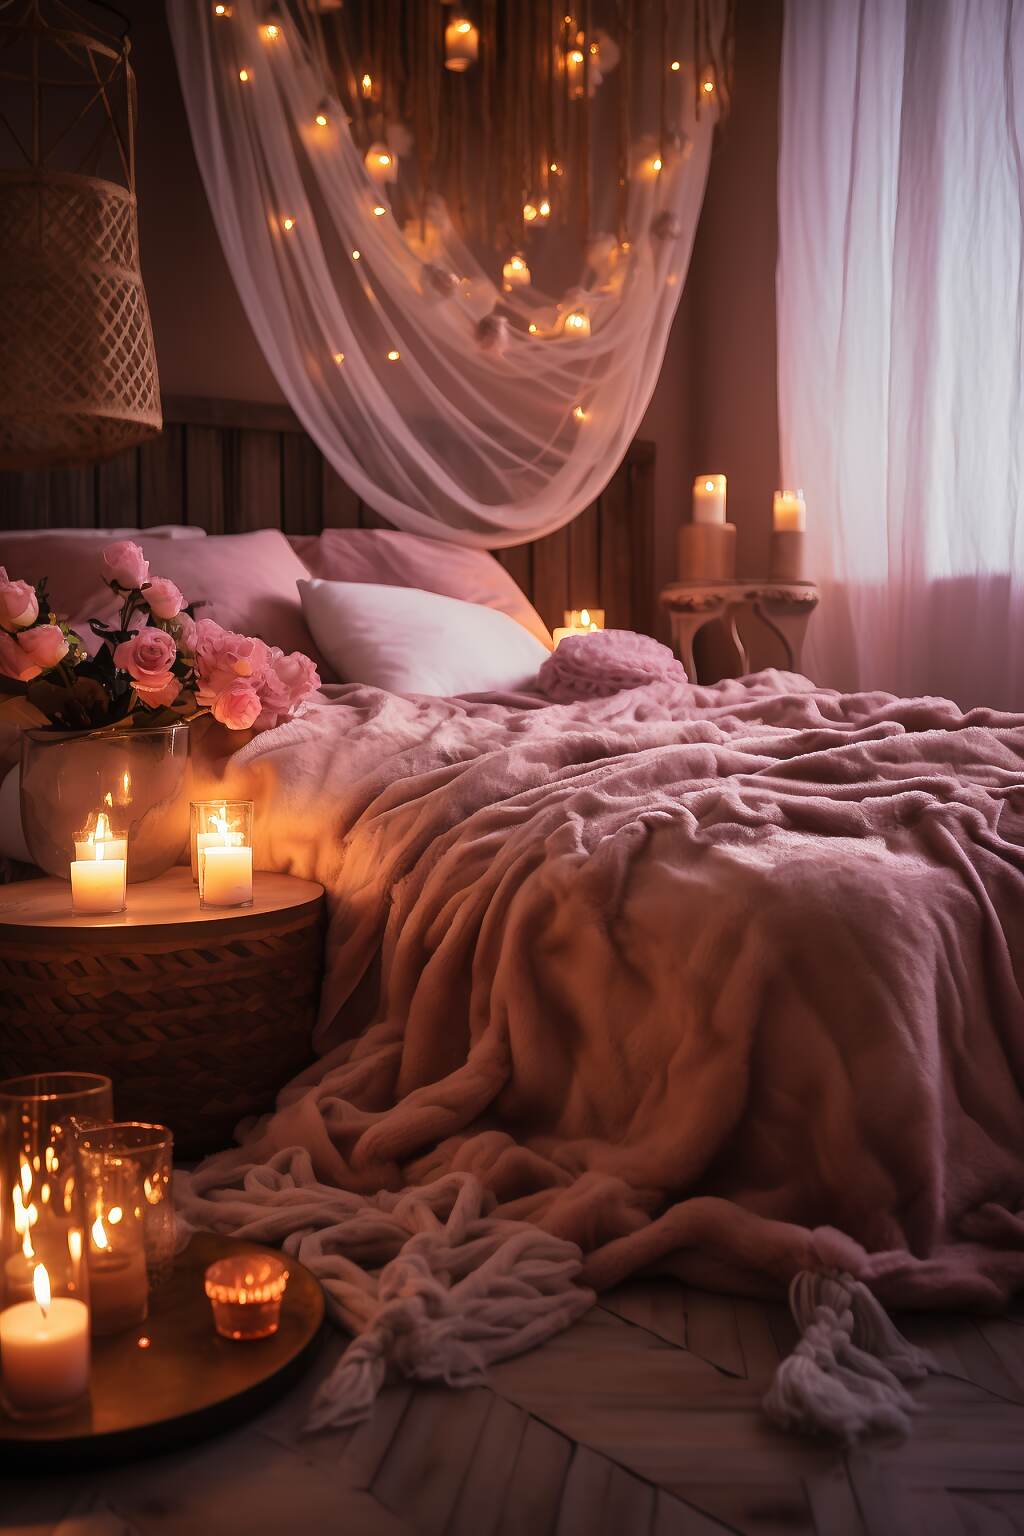 Medium-Sized Dark Boho Bedroom With A Pink &Amp; Cream Color Scheme, Featuring Rose Petal Decor, Lace Textiles, And Floral Art, Creating A Romantic And Soft Atmosphere.